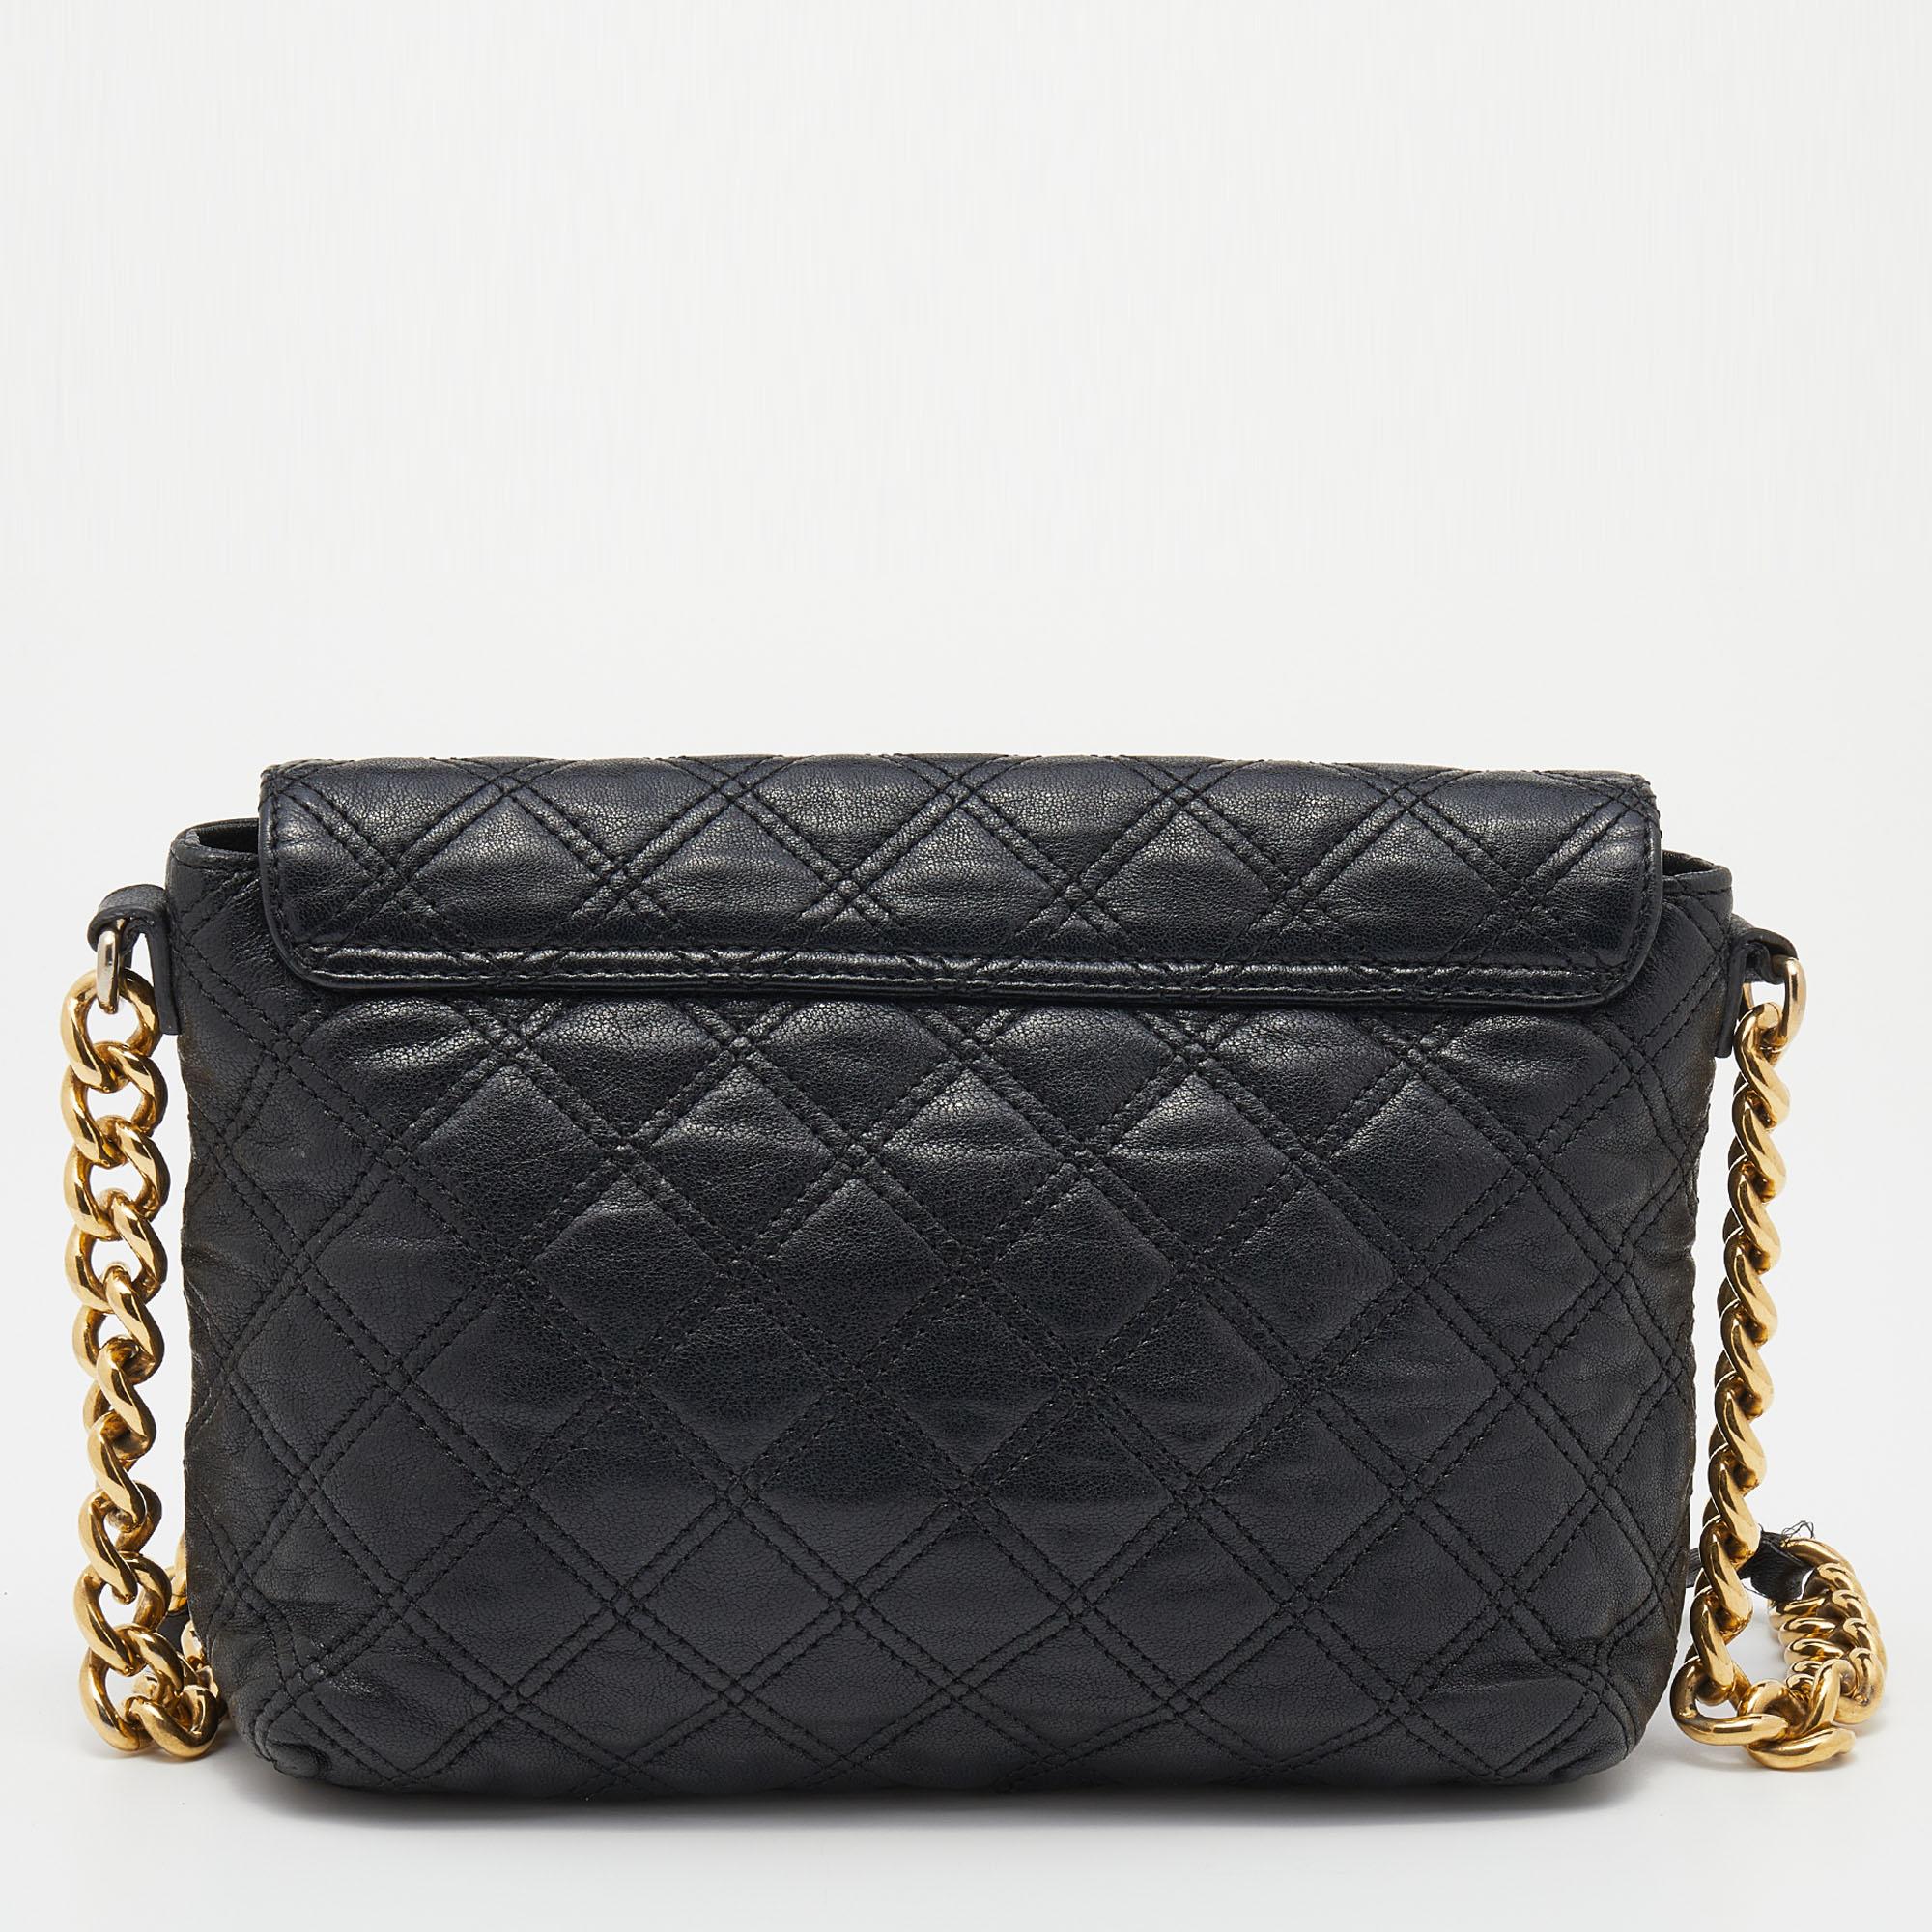 This functional flap bag by Marc Jacobs is crafted from quilted leather. It comes with a chainlink shoulder strap and a spacious fabric-lined interior. The bag is highlighted by a gold-tone lock on the front.

Includes: Original Dustbag